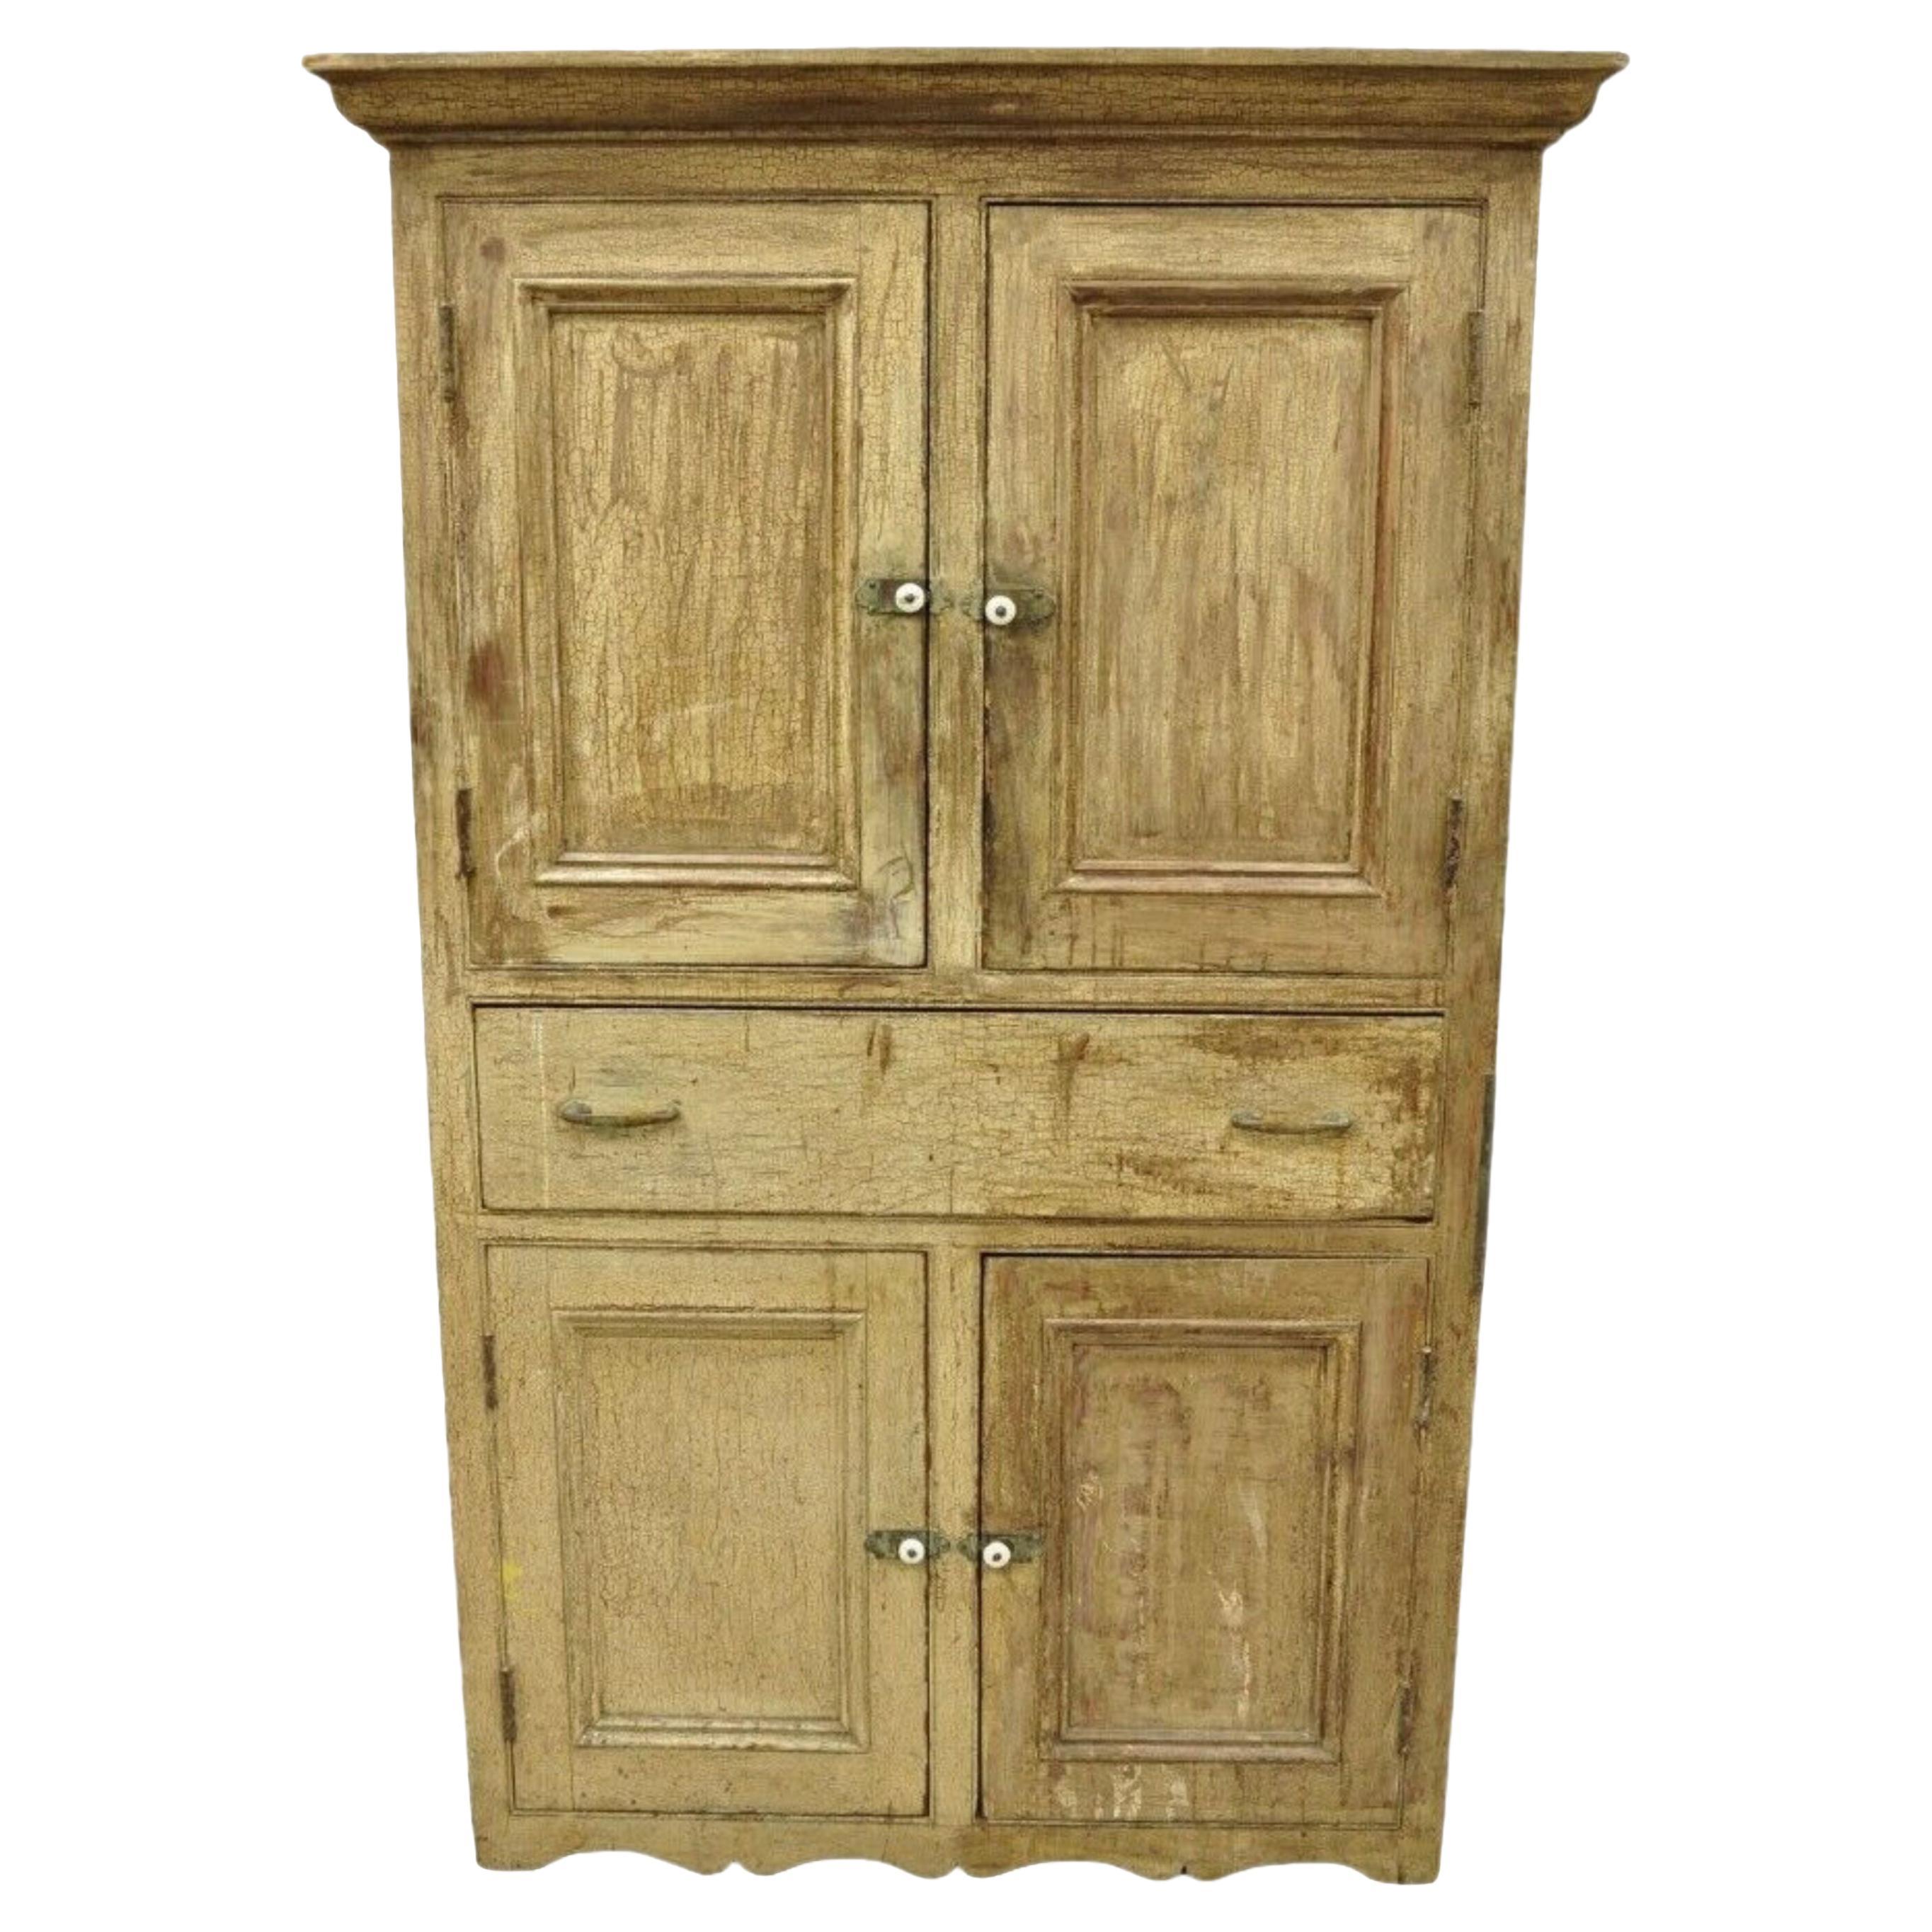 Antique French Country Primitive Beige Distressed Painted Cupboard Hutch Cabinet For Sale